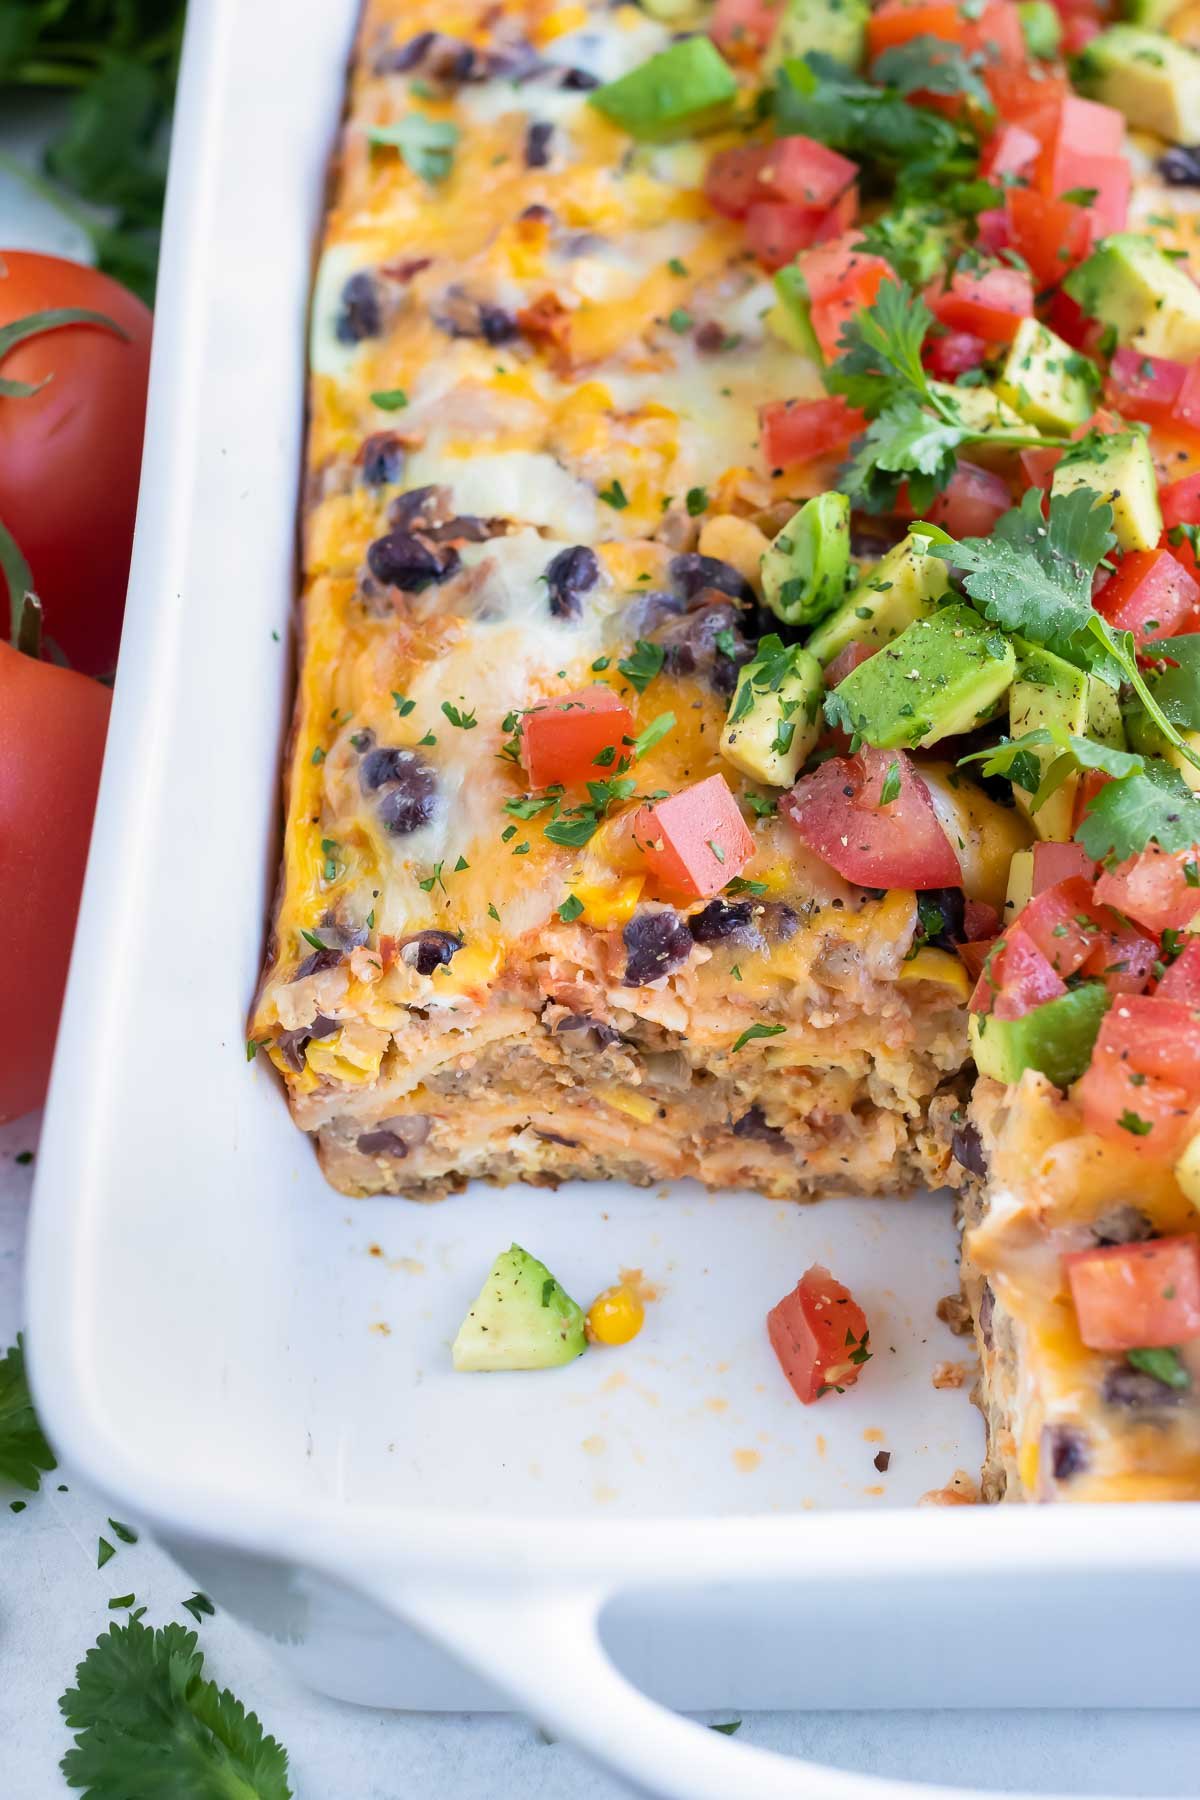 Mexican breakfast casserole is made with corn, eggs, and ground meat for a healthy breakfast.